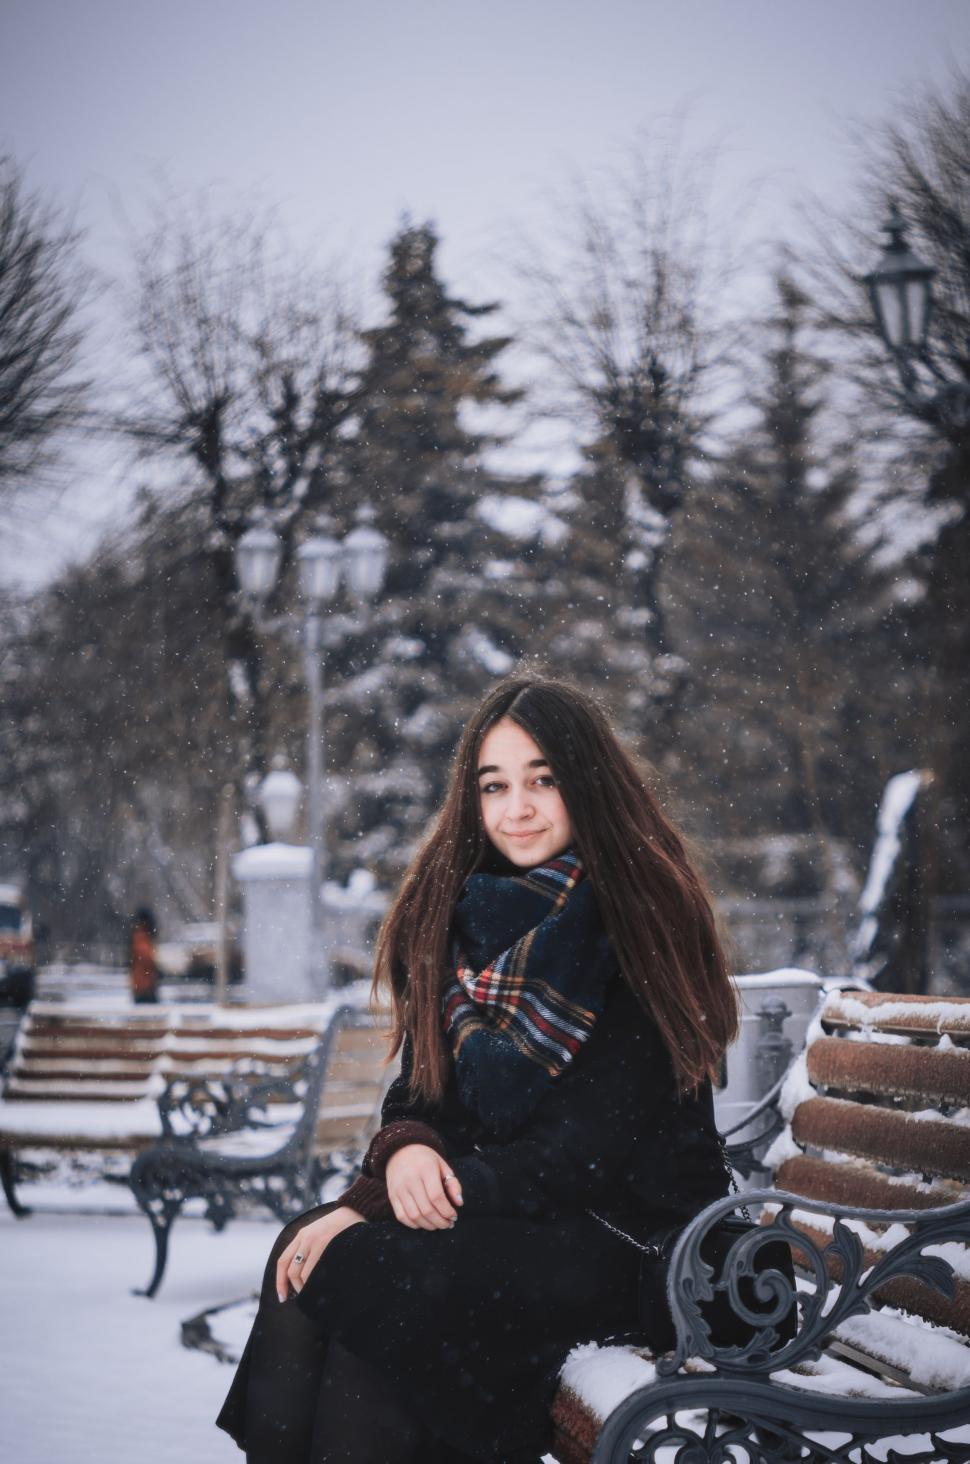 Free Image of Woman Sitting on Bench in Snow 